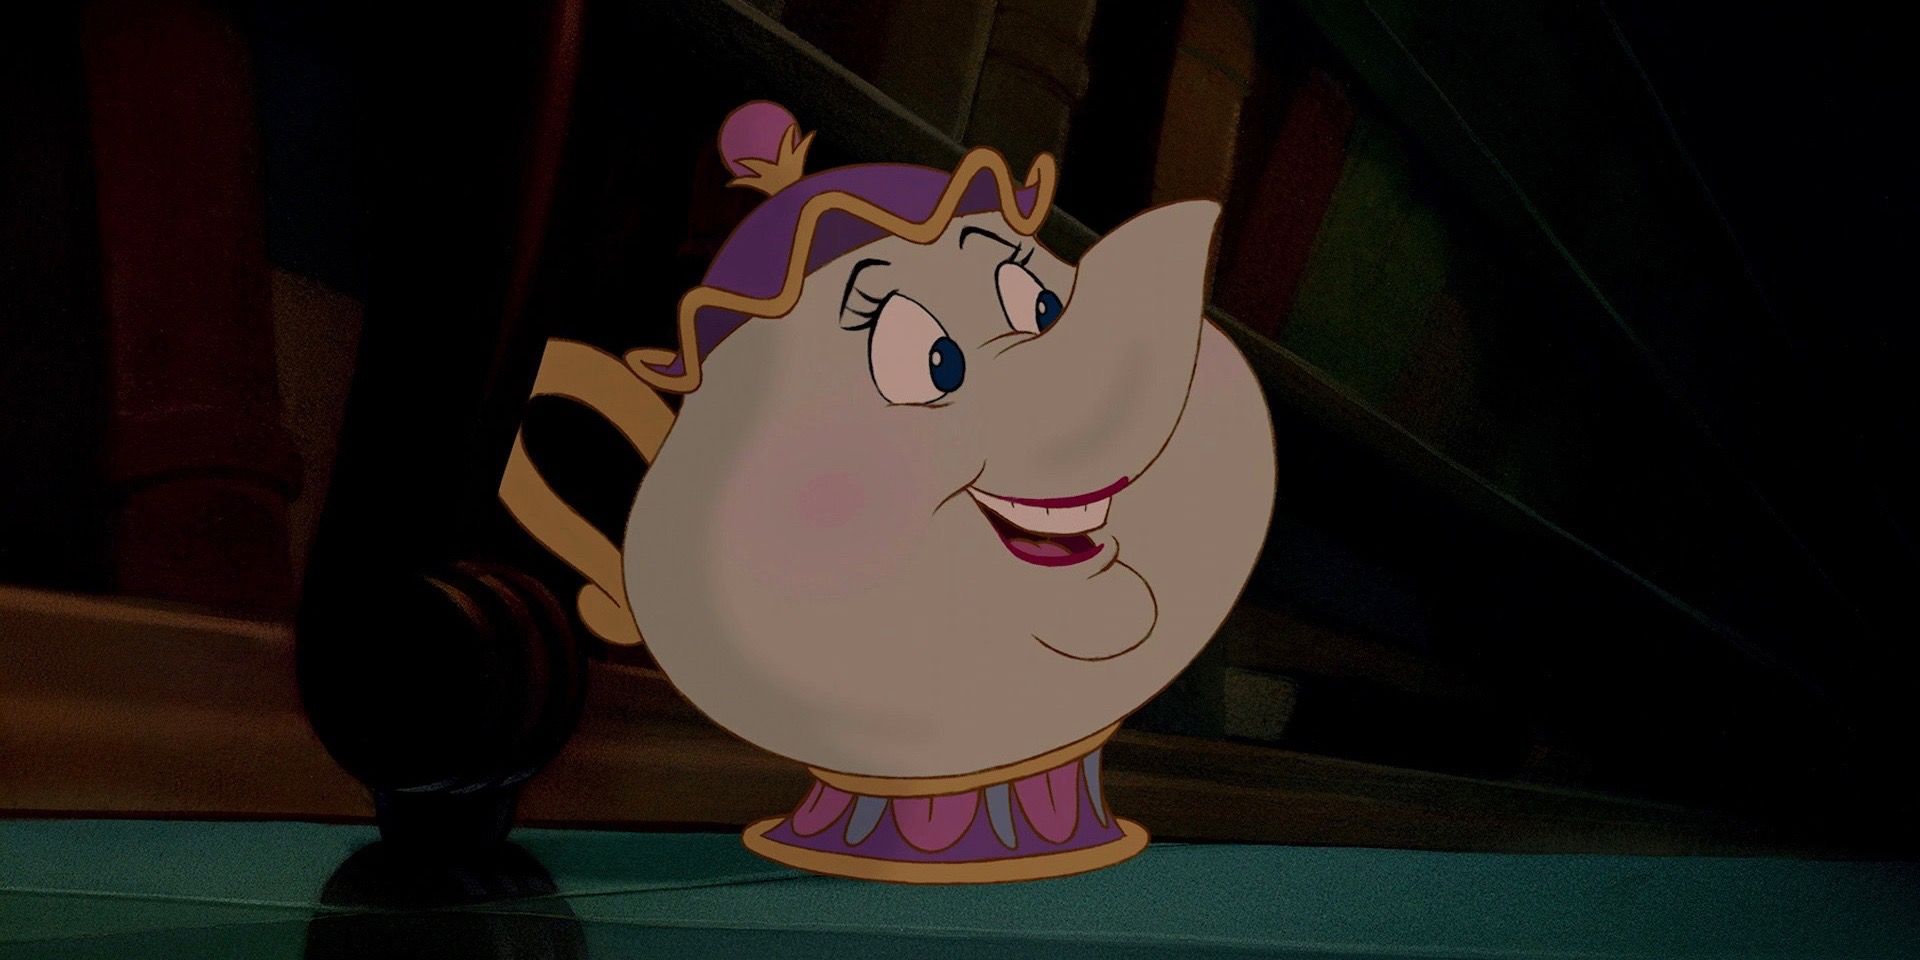 Angela Lansbury as Mrs. Potts in Beauty and the Beast